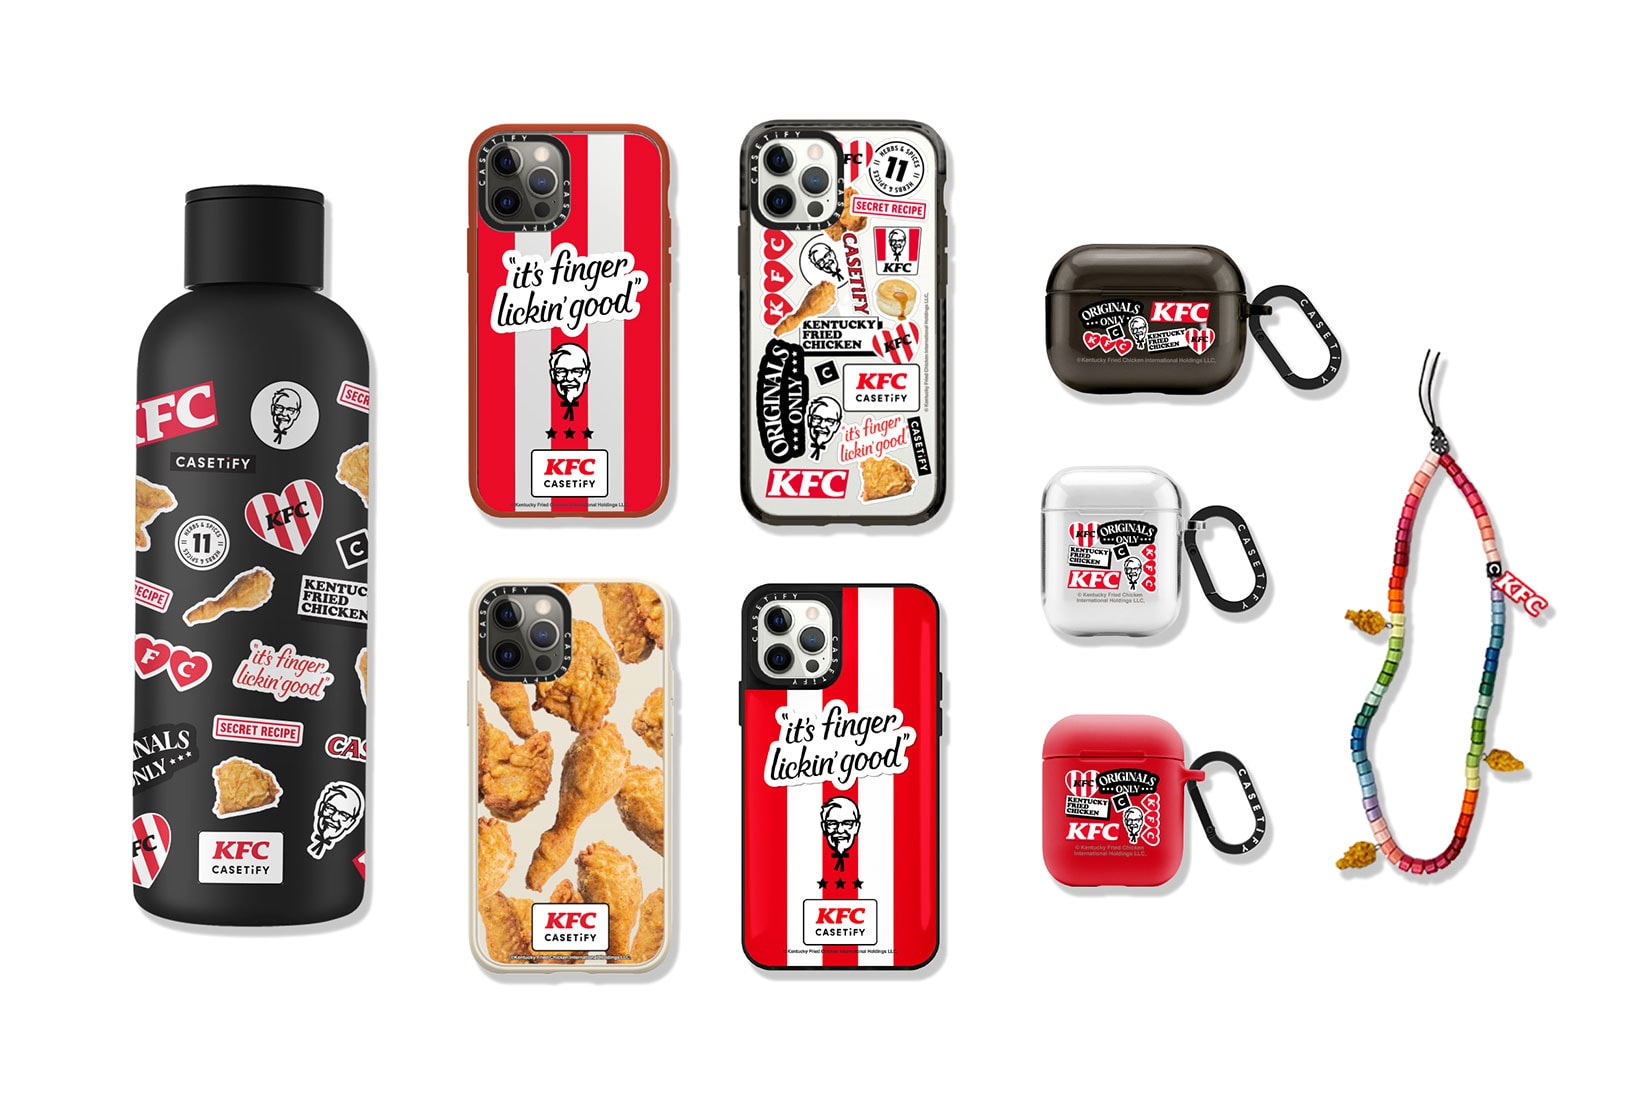 KFC Casetify Tech Accessories Collaboration Water Bottle Apple iPhone AirPods Cases Beaded Strap